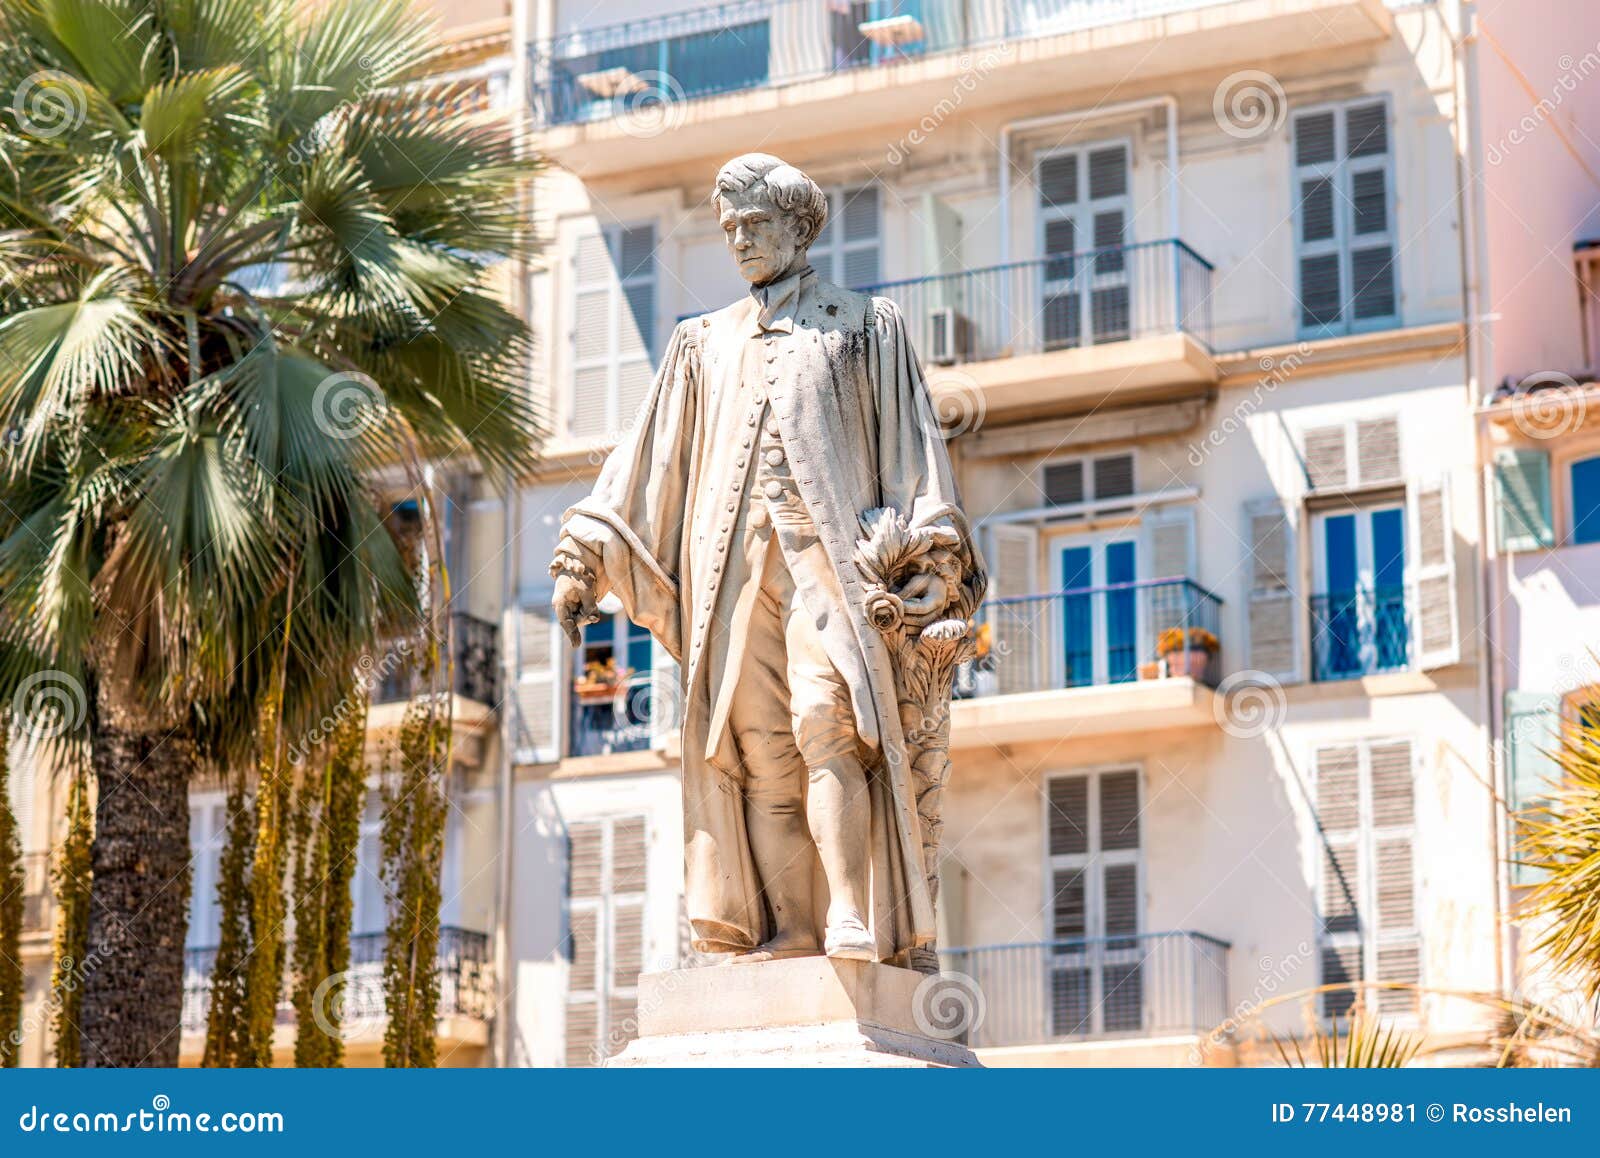 lord brougham statue in cannes city